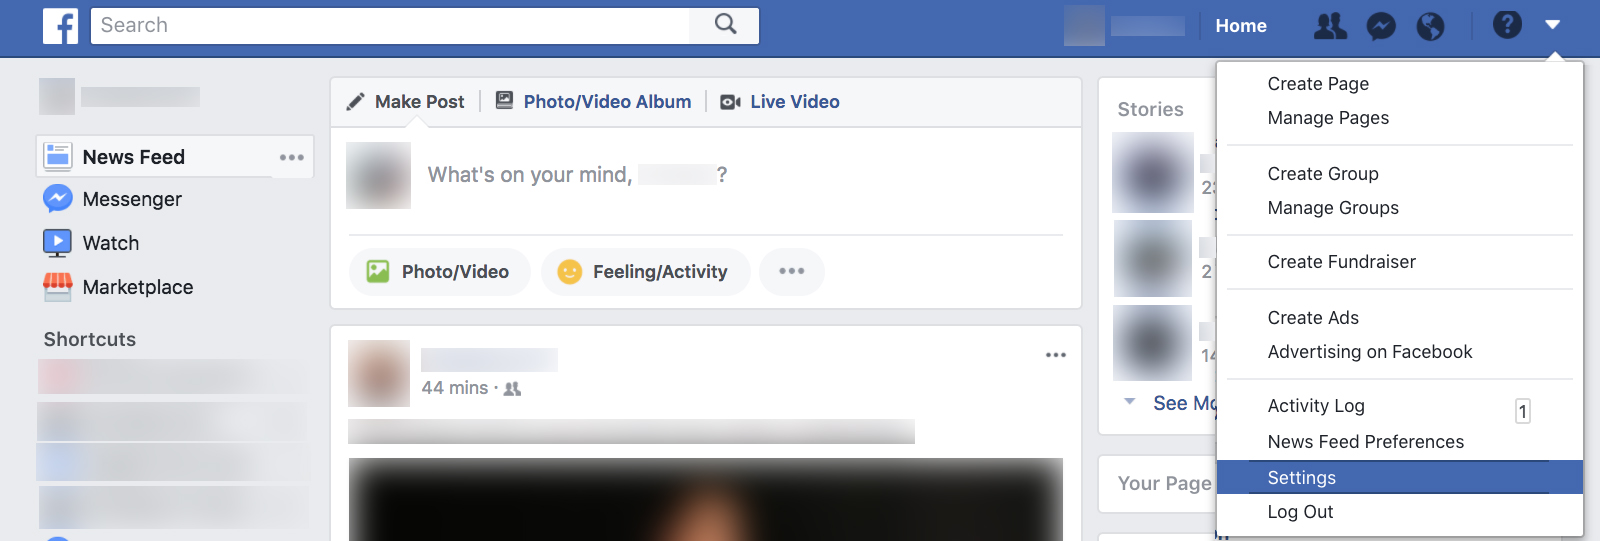 Find privacy settings on Facebook